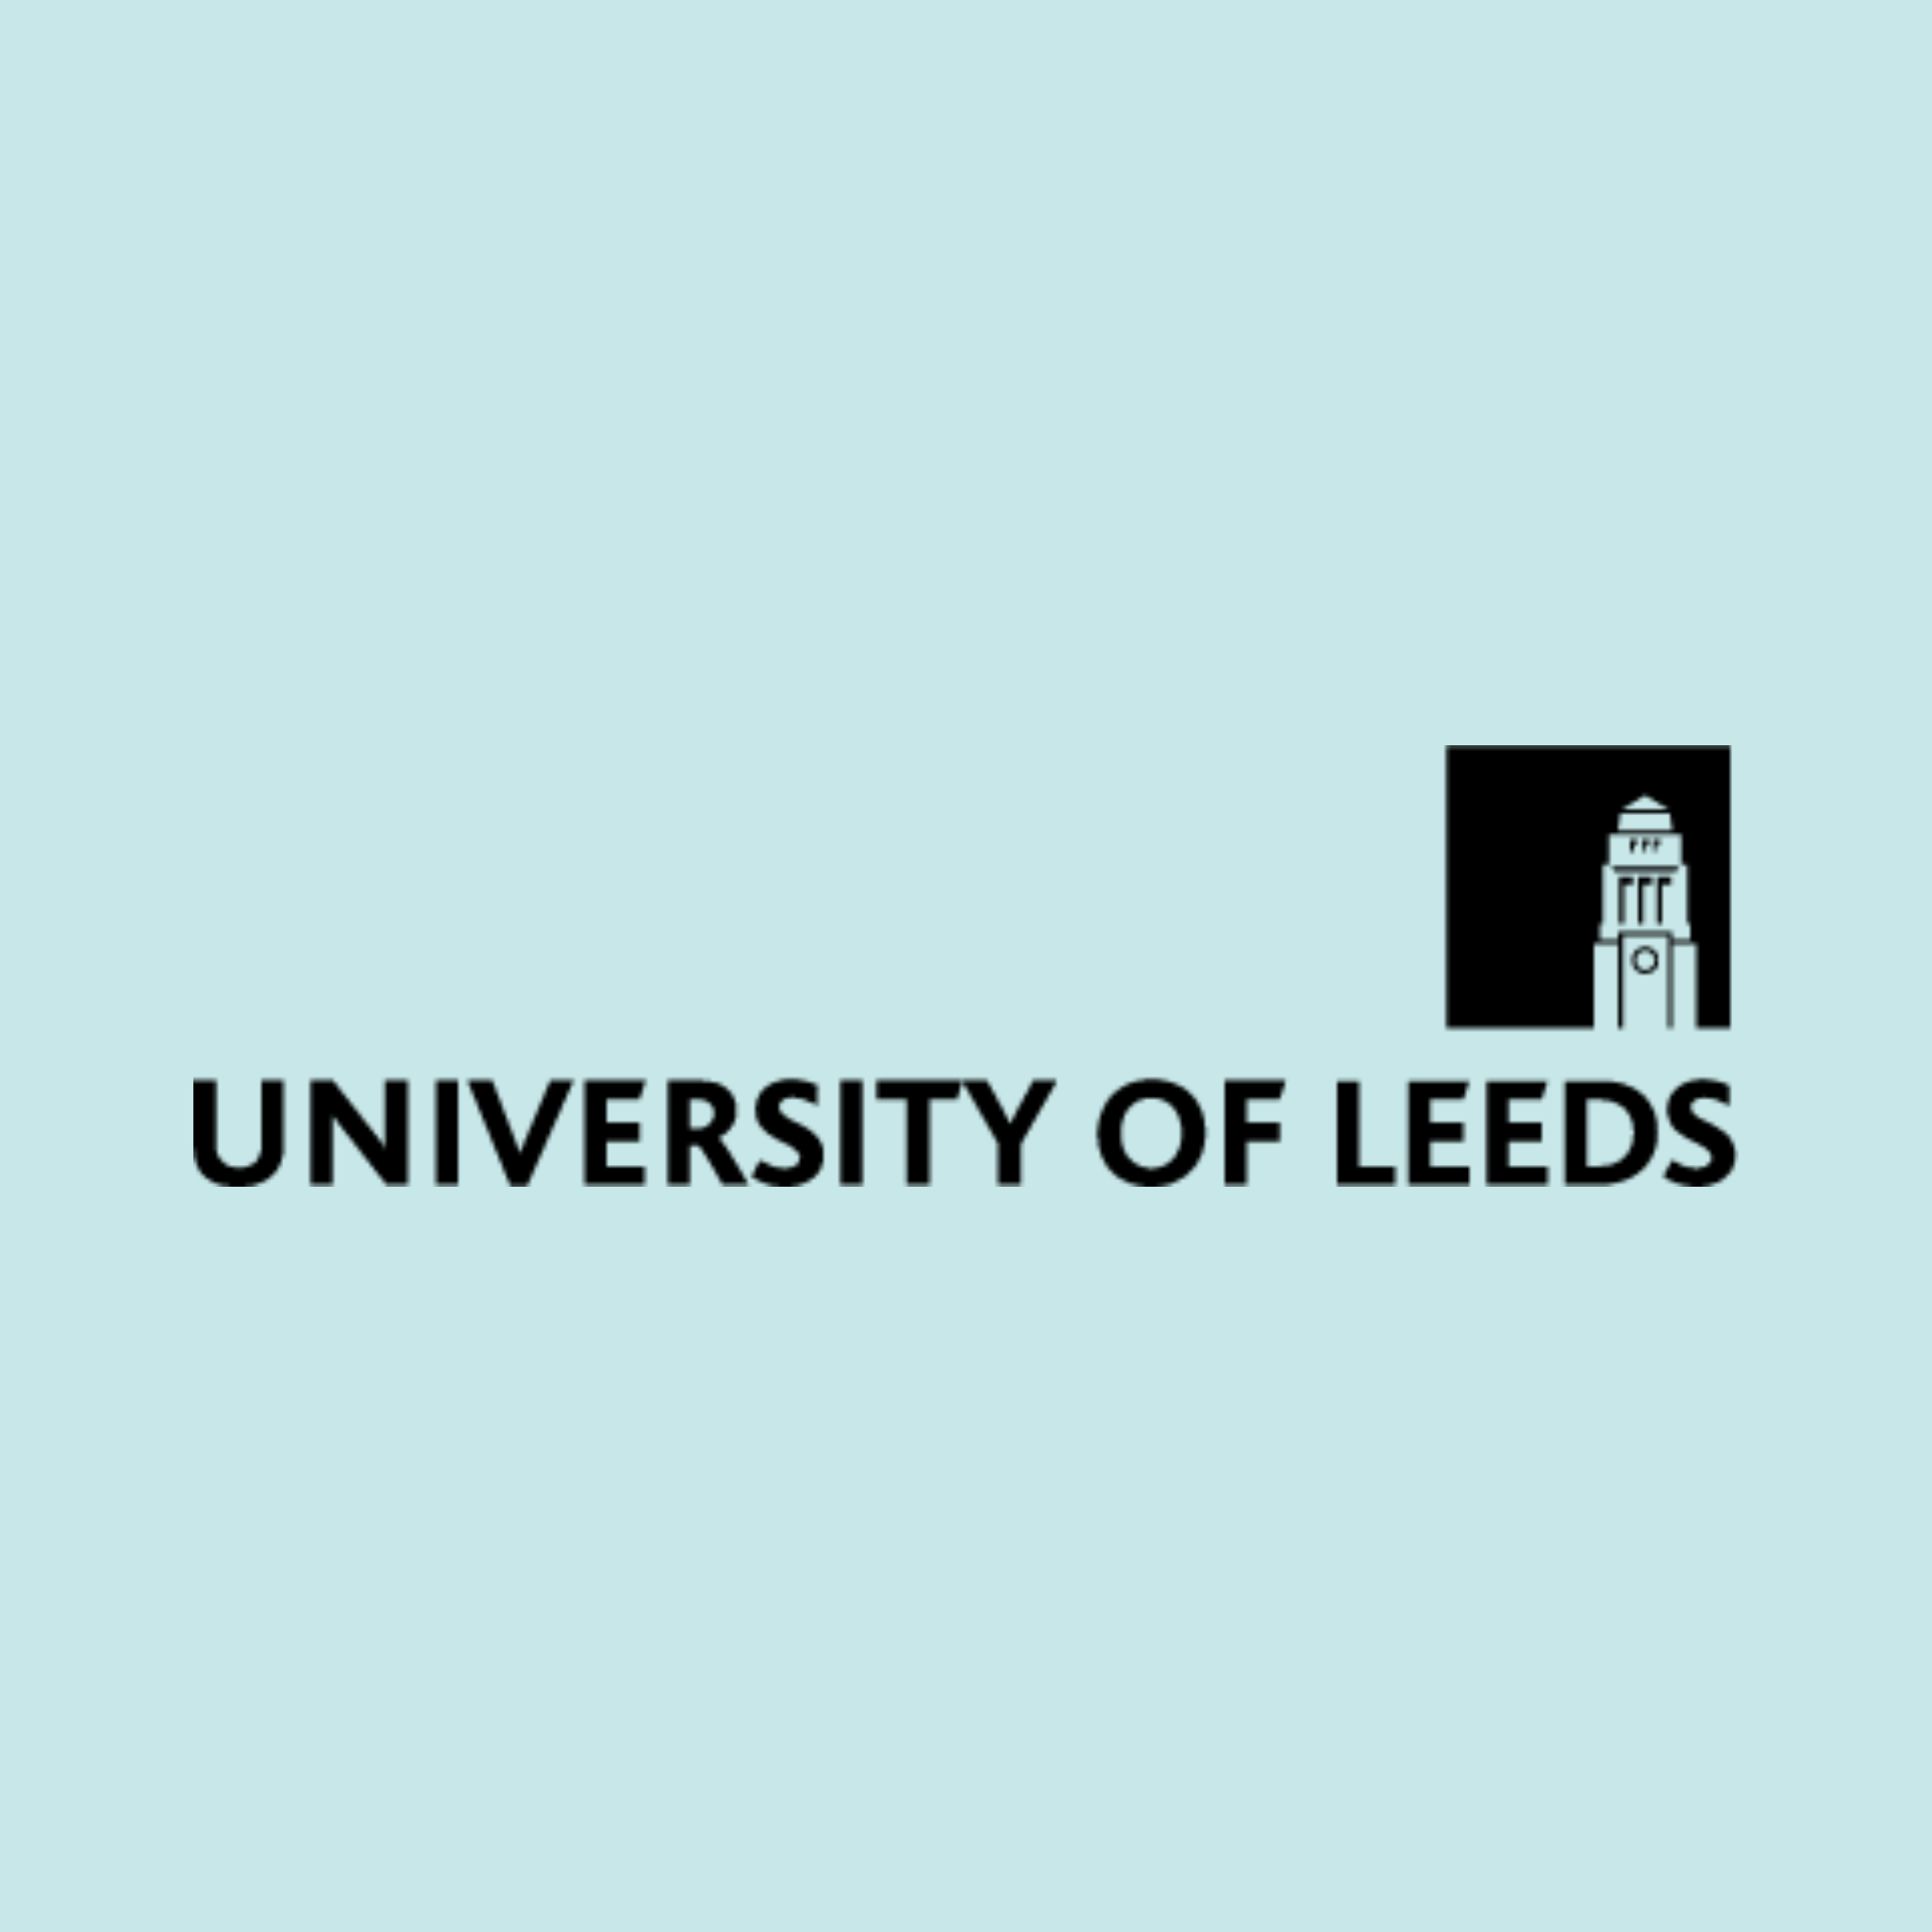 University of Leeds logo in black on an icy blue background